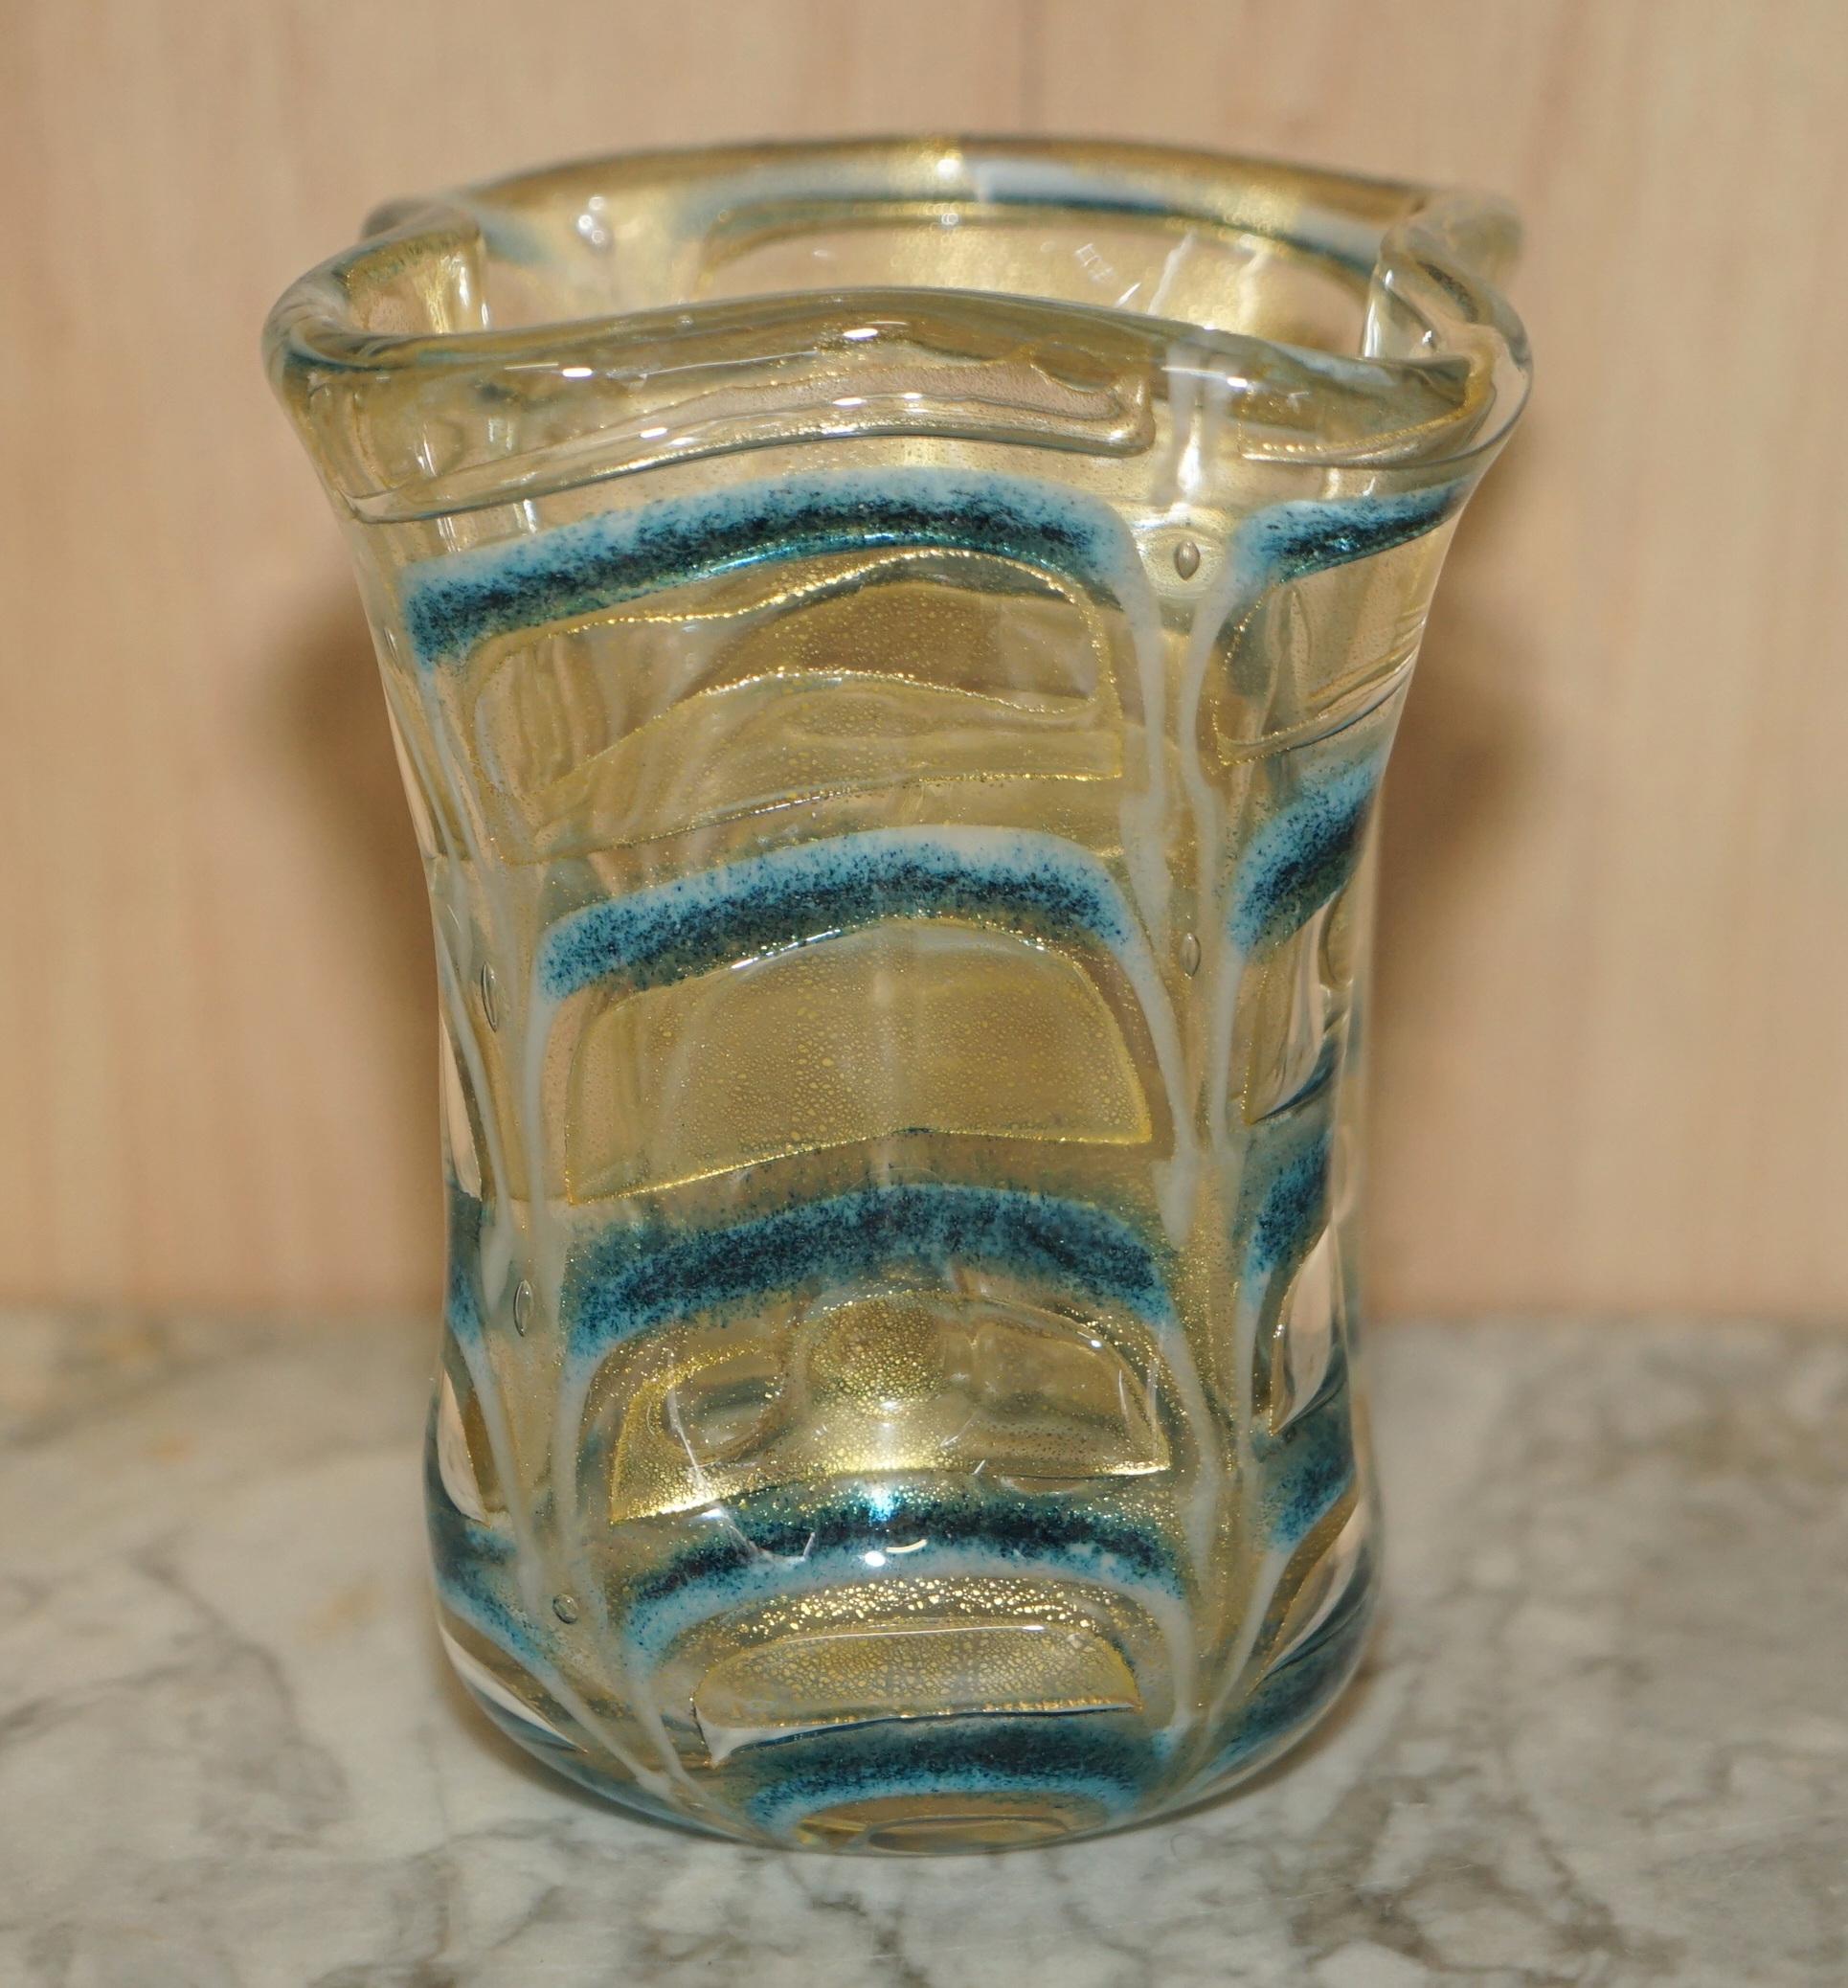 We are delighted to offer for sale this stunning one of a kind decorative crimped glass vase.

This piece looks sublime from every angle, it doesn’t have any damage that I can see, it is very decorative.

Dimensions

Height:- 15.5cm

Width:-